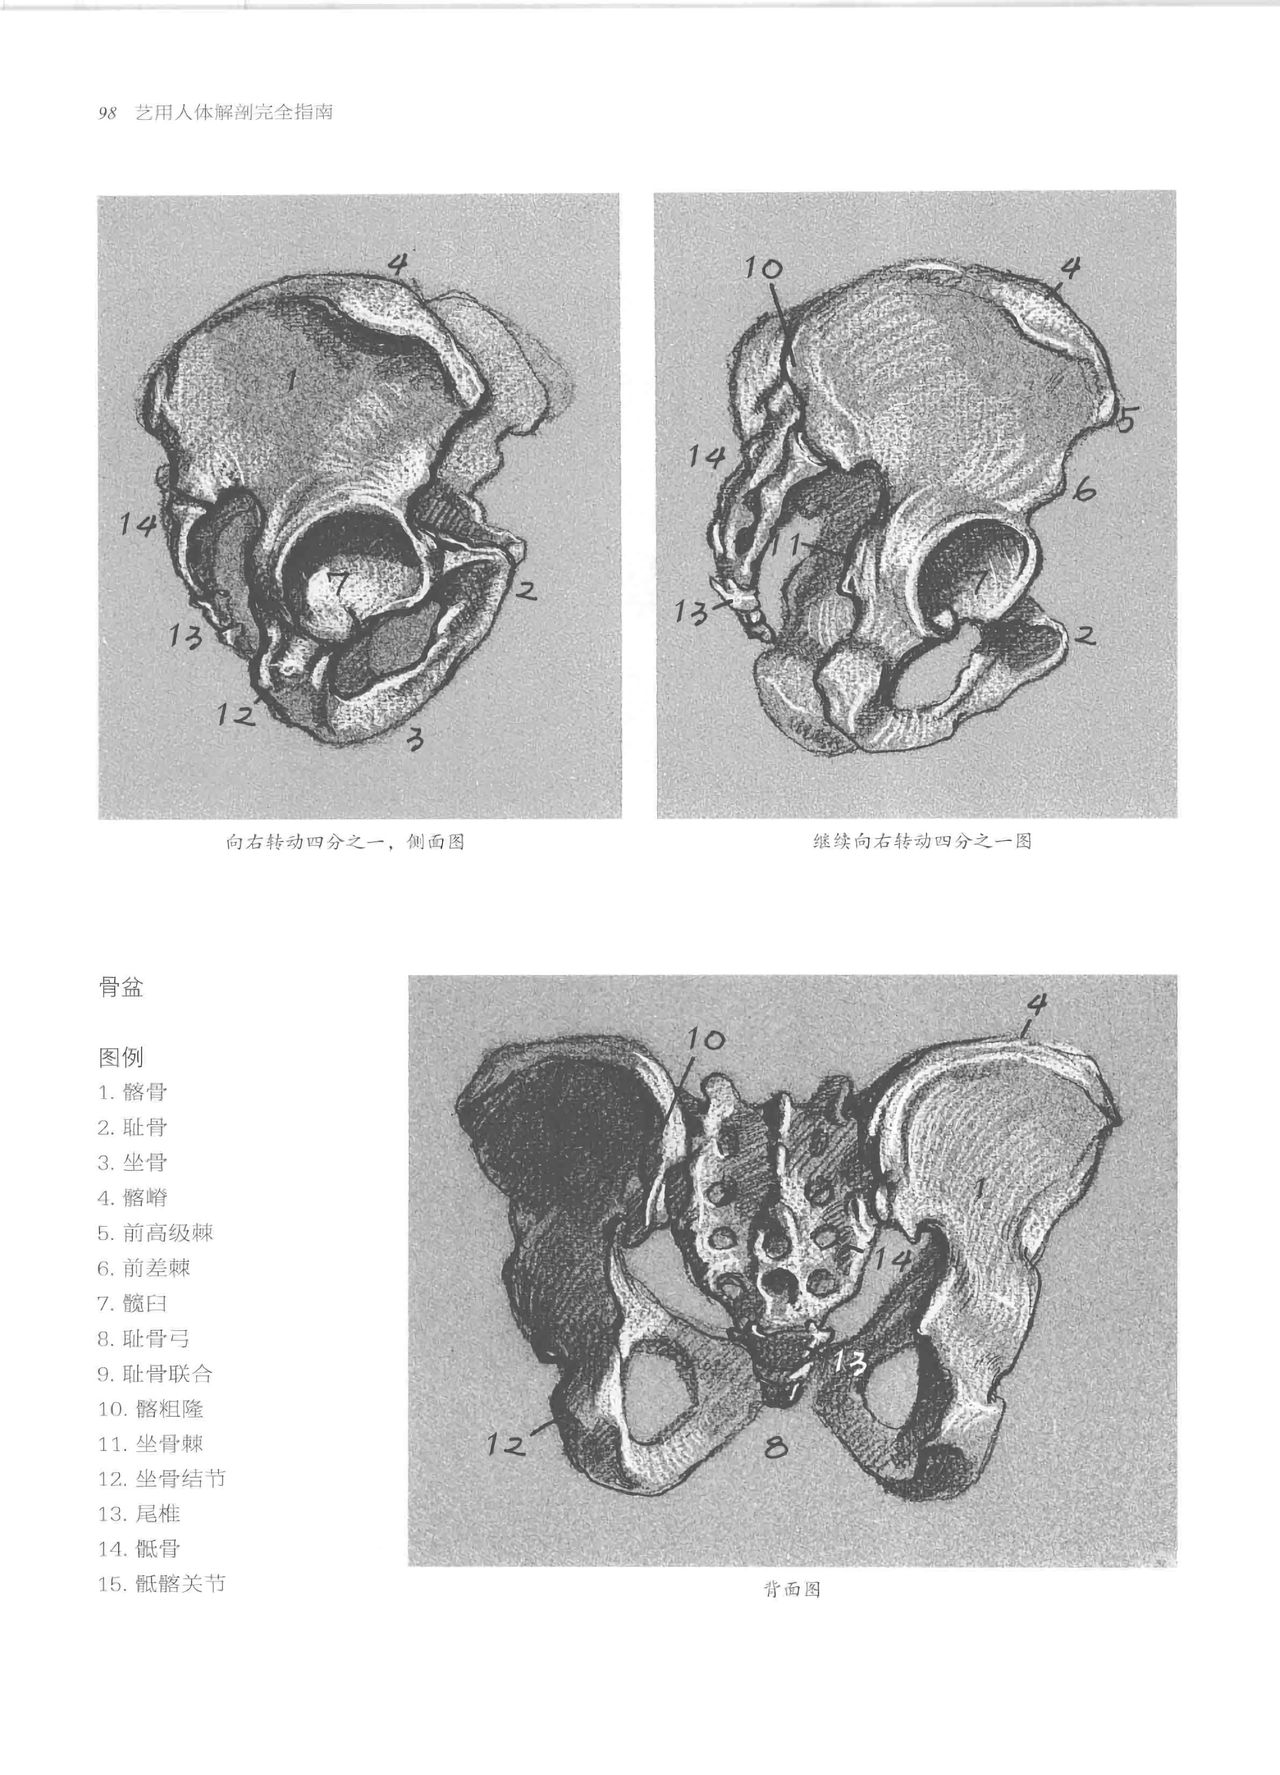 Anatomy-A Complete Guide for Artists - Joseph Sheppard [Chinese] 98